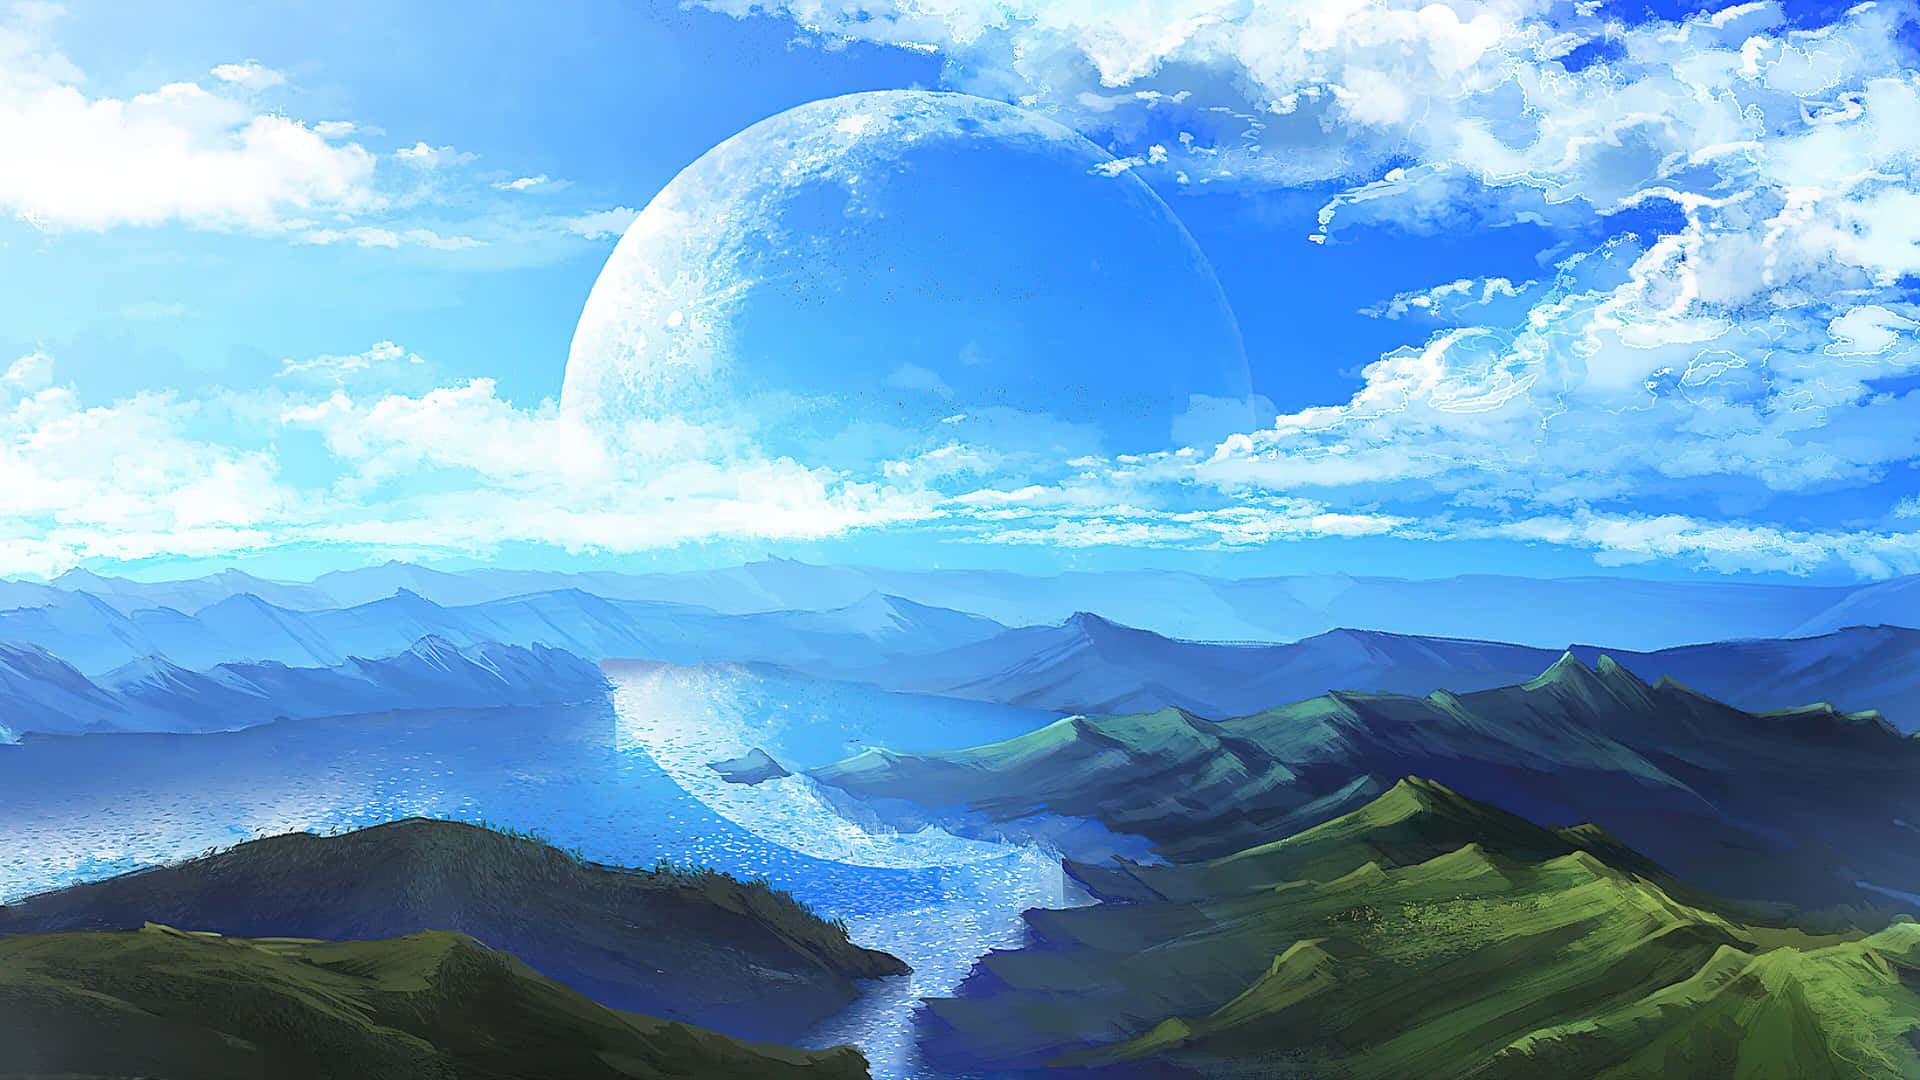 Discover a beautiful anime sky on this breathtaking anime wallpaper.